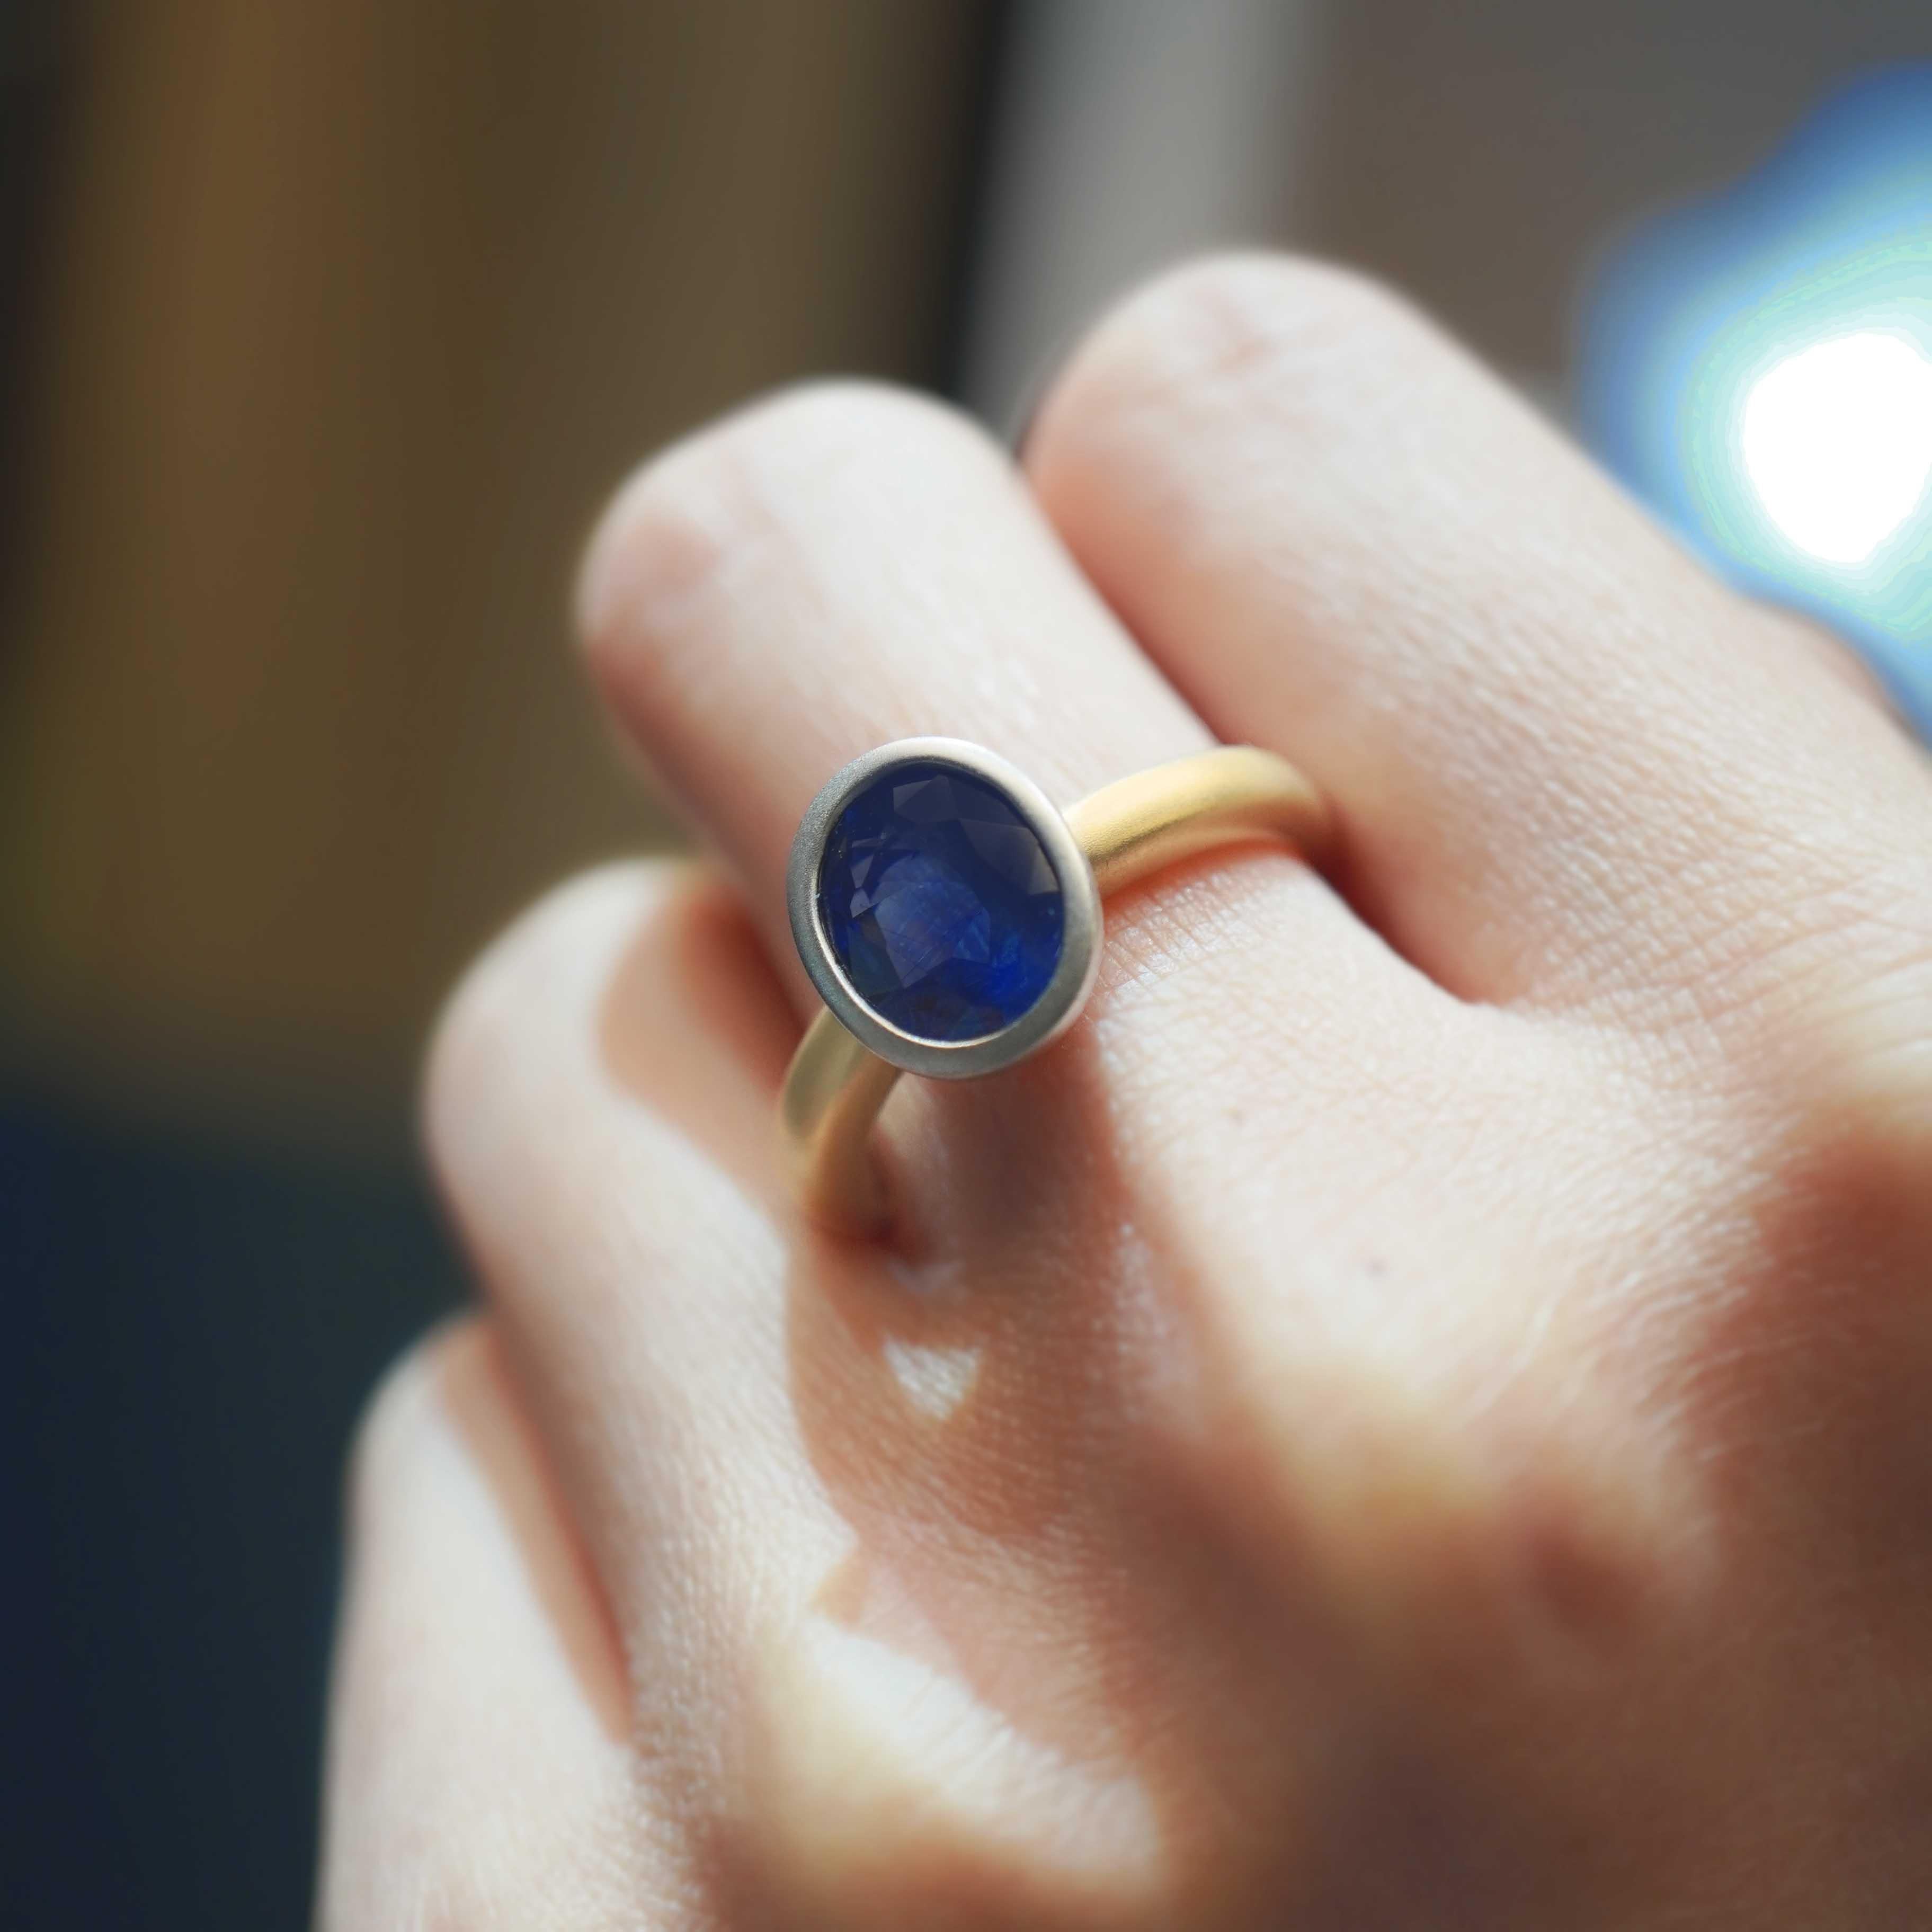 A 2.23 carat vivid blue sapphire is set in Italian matt finish 18K gold ring. The ring is hand made in Hong Kong and the total gram weight is 6.70 grams. The best color for a natural blue sapphire is an intense, velvety, deep royal blue. This color